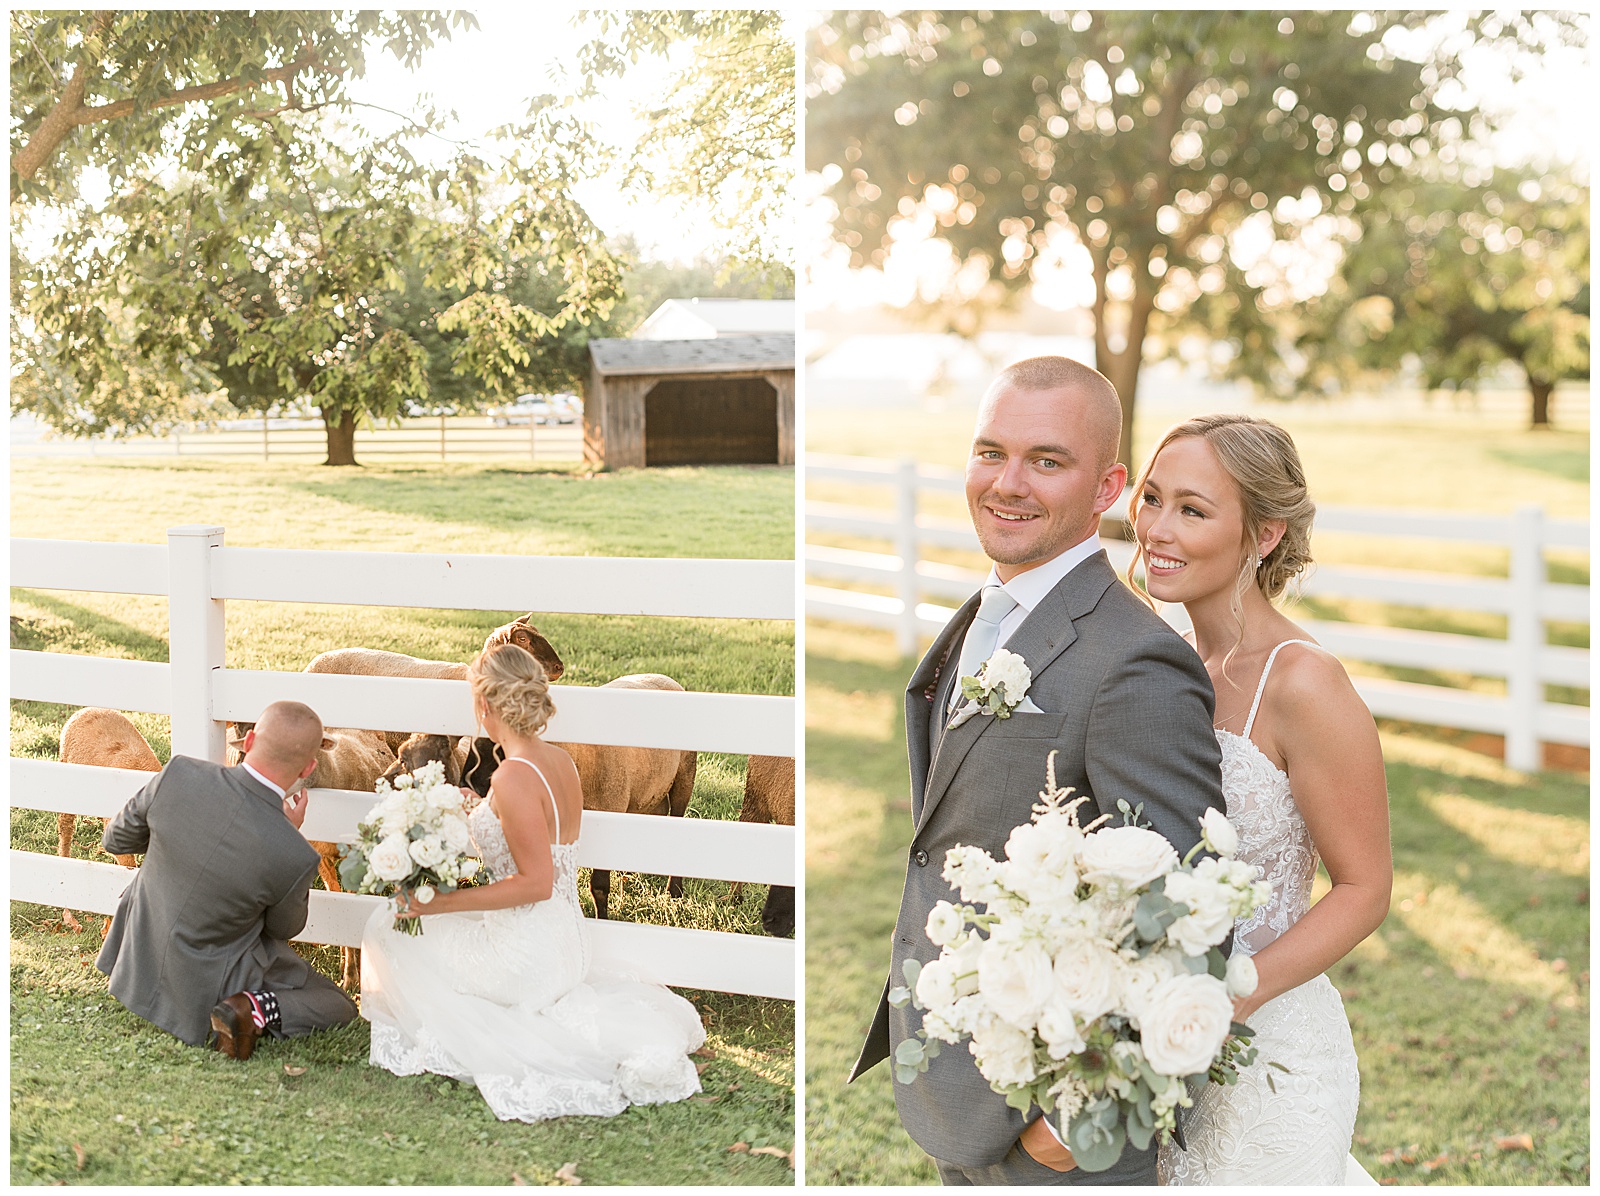 bride hugs groom from behind while holding her bouquet and they both smile on sunny evening by white fence